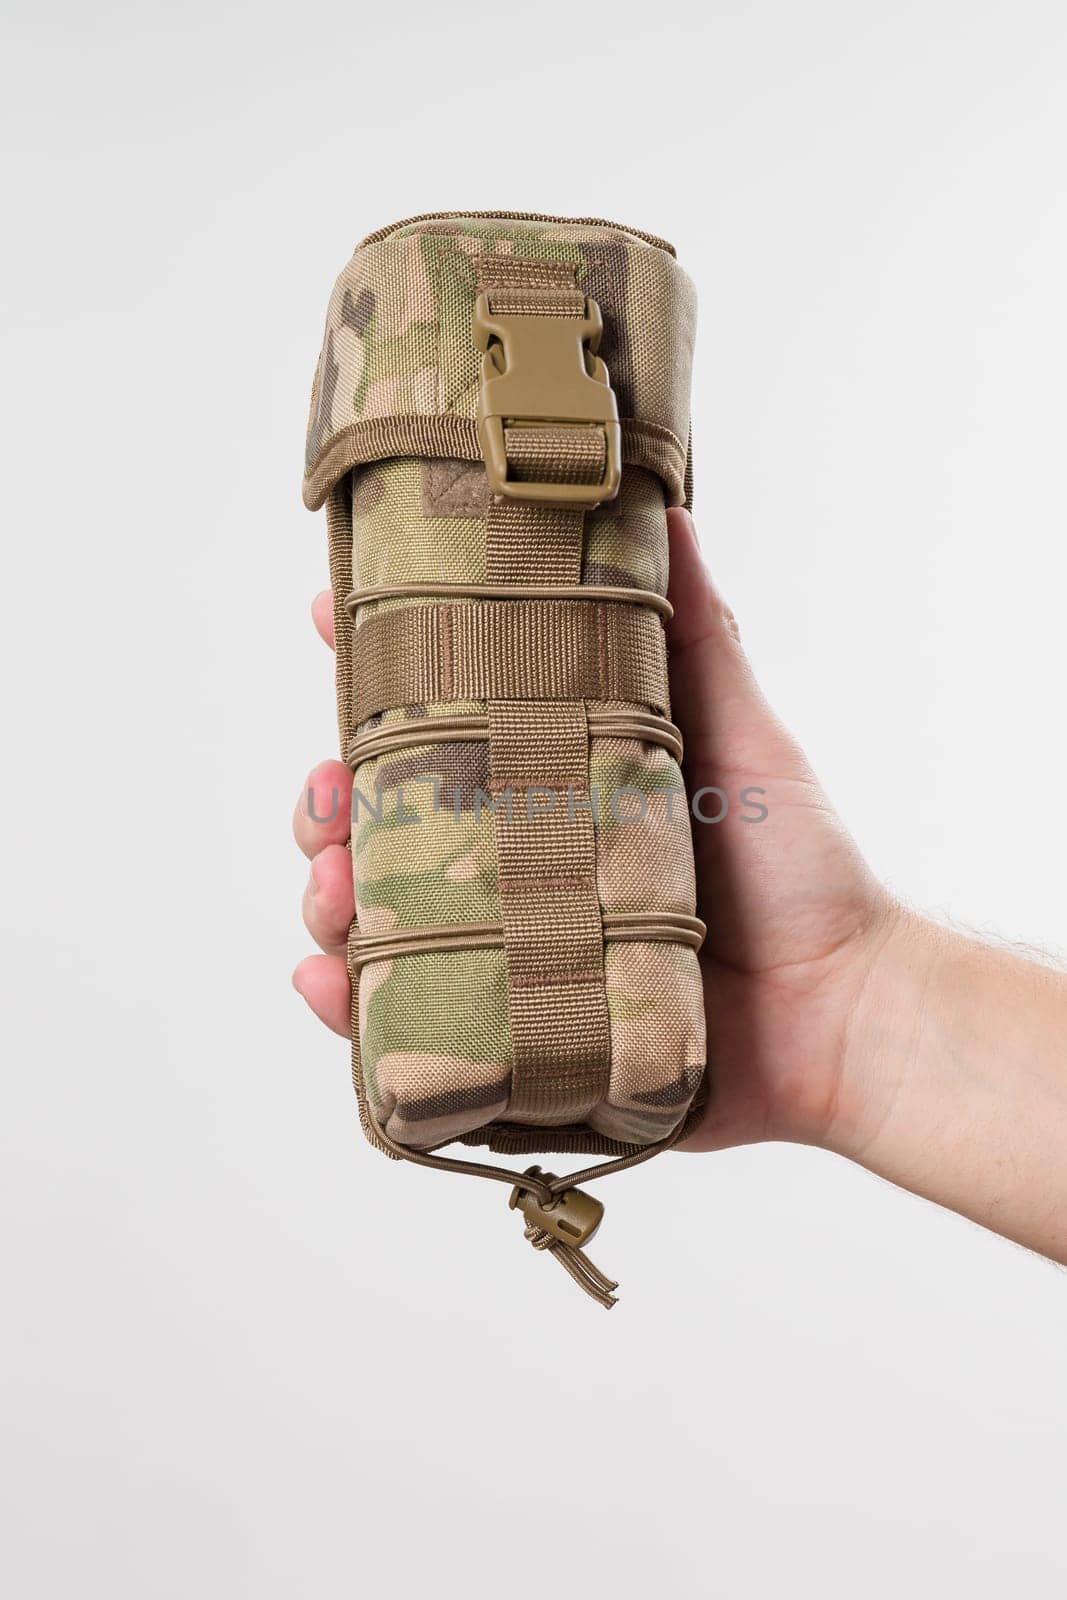 A man holds a protective cover for a monocular, pixelated fabric for the military. by Niko_Cingaryuk